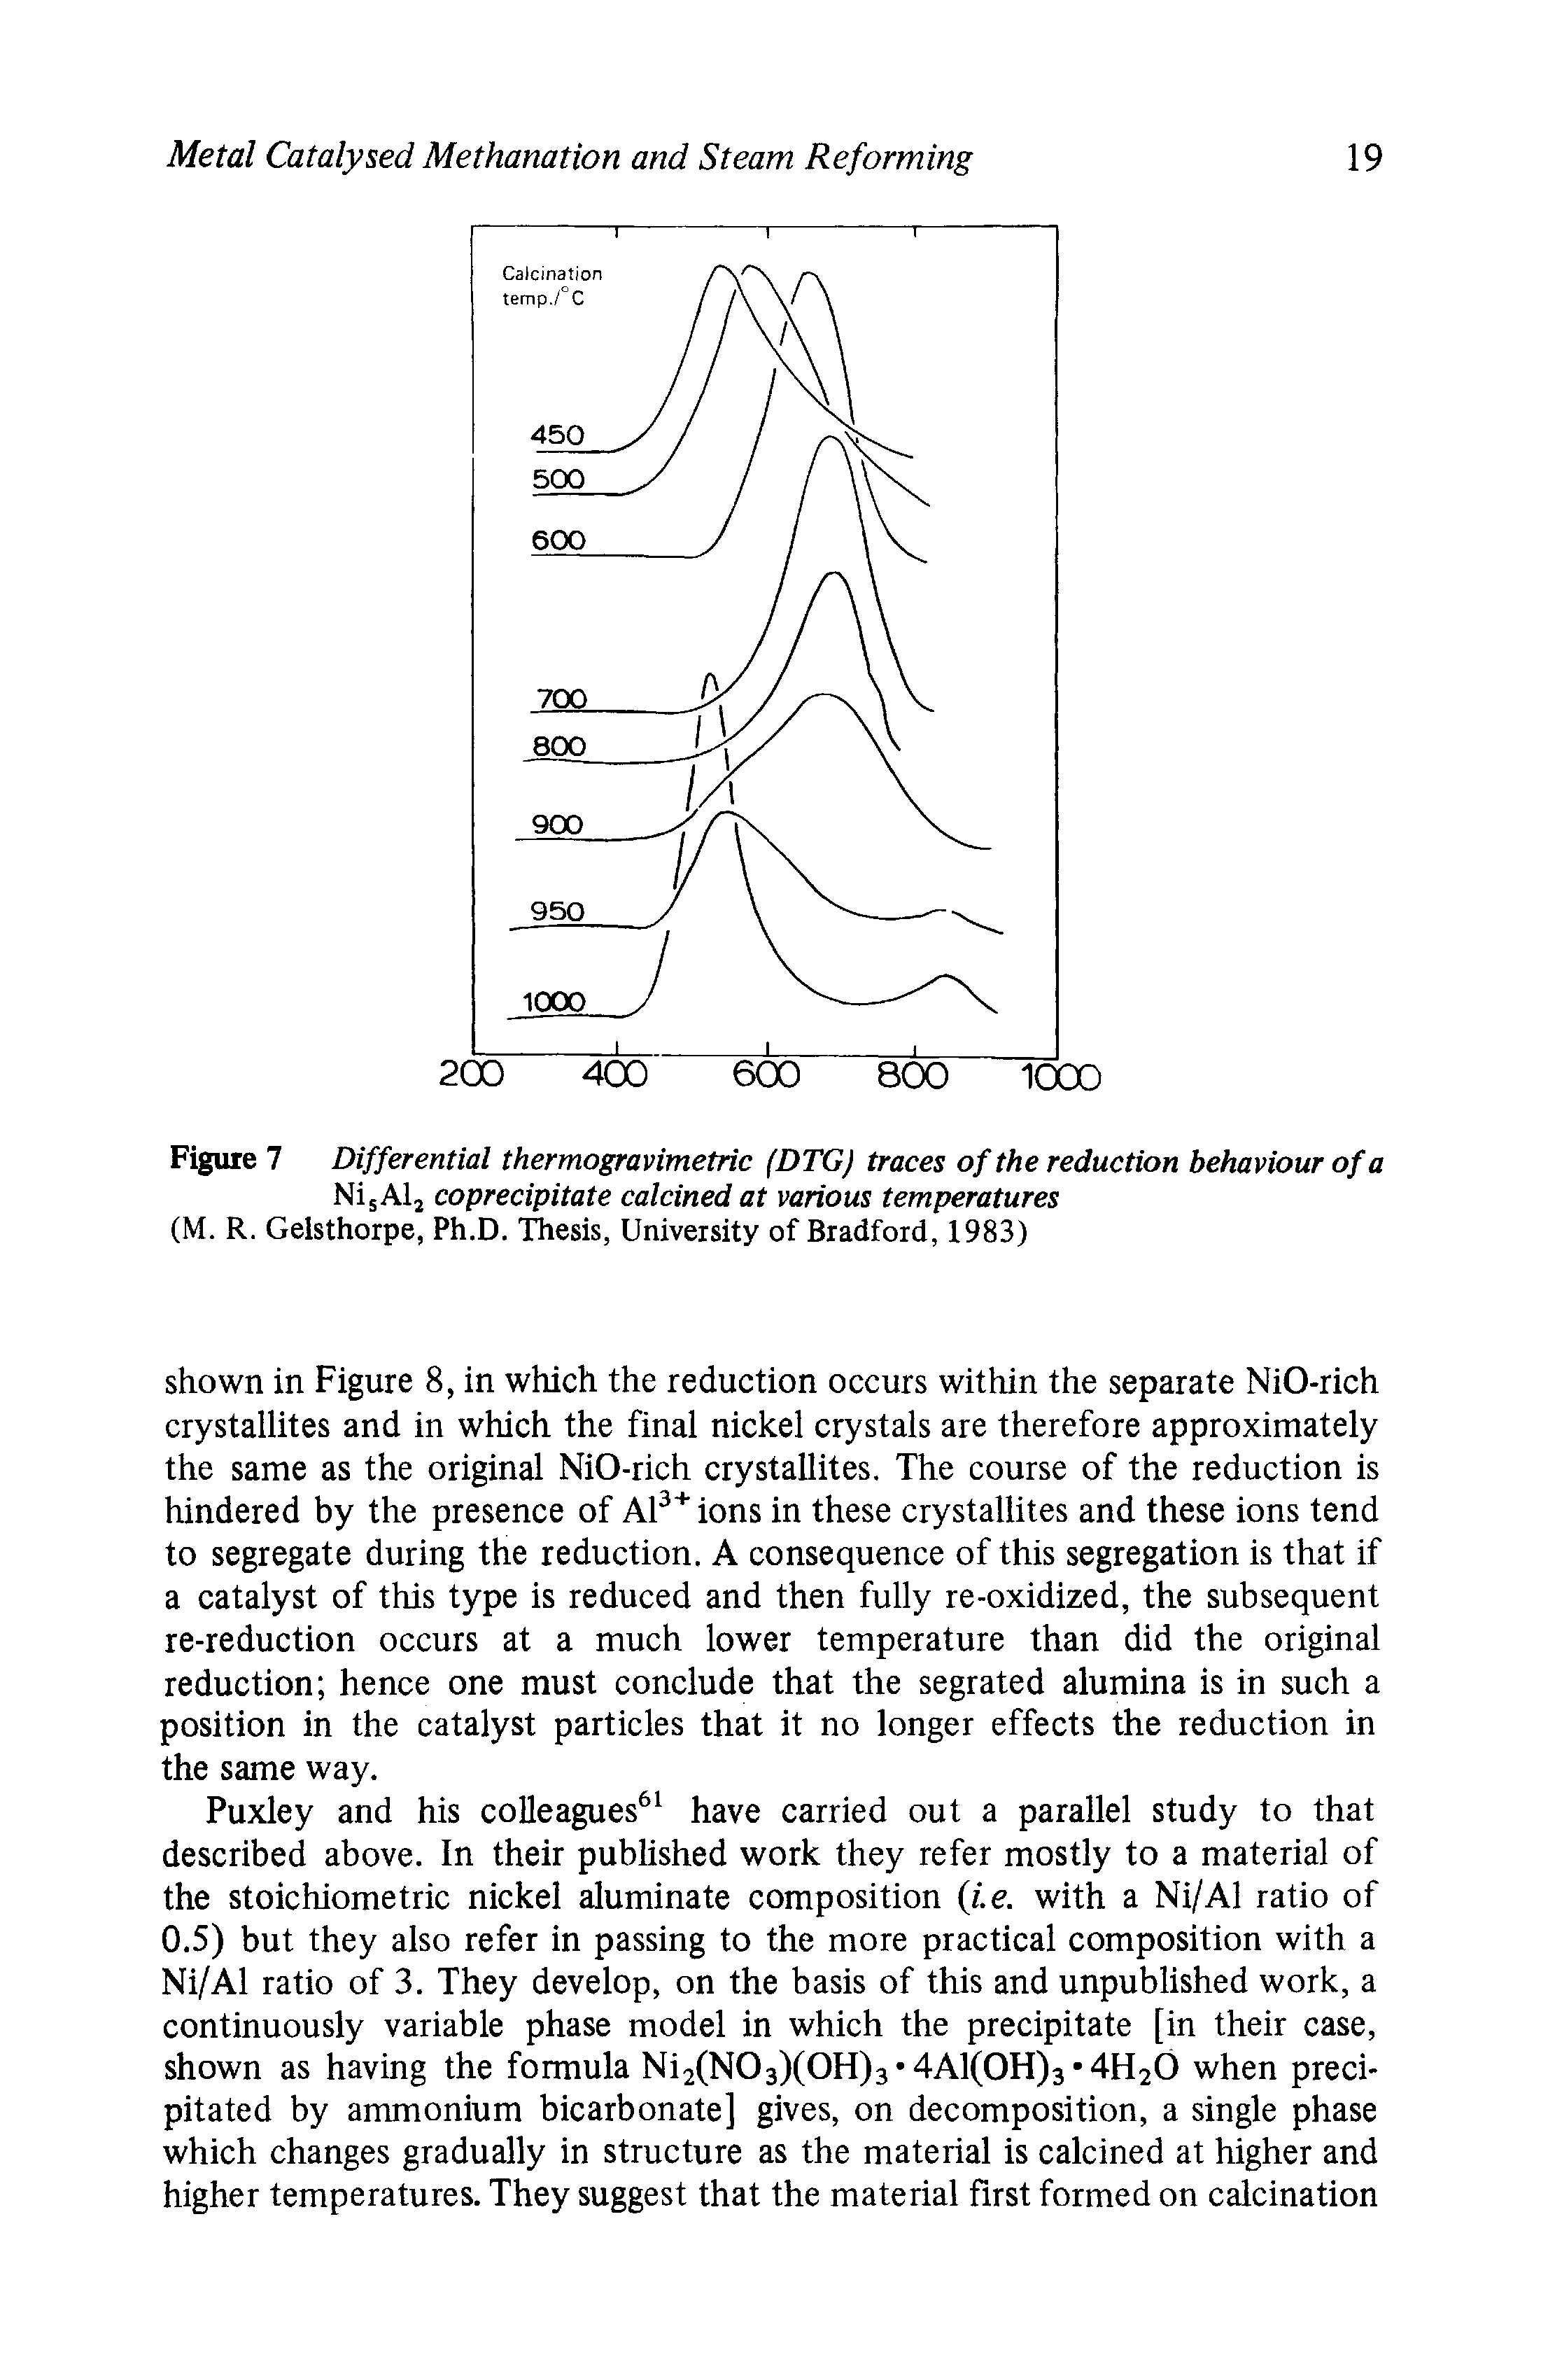 Figure 7 Differential thermogravimetric (DTG) traces of the reduction behaviour of a NisAl2 coprecipitate calcined at various temperatures (M. R. Gelsthorpe, Ph.D. Thesis, University of Bradford, 1983)...